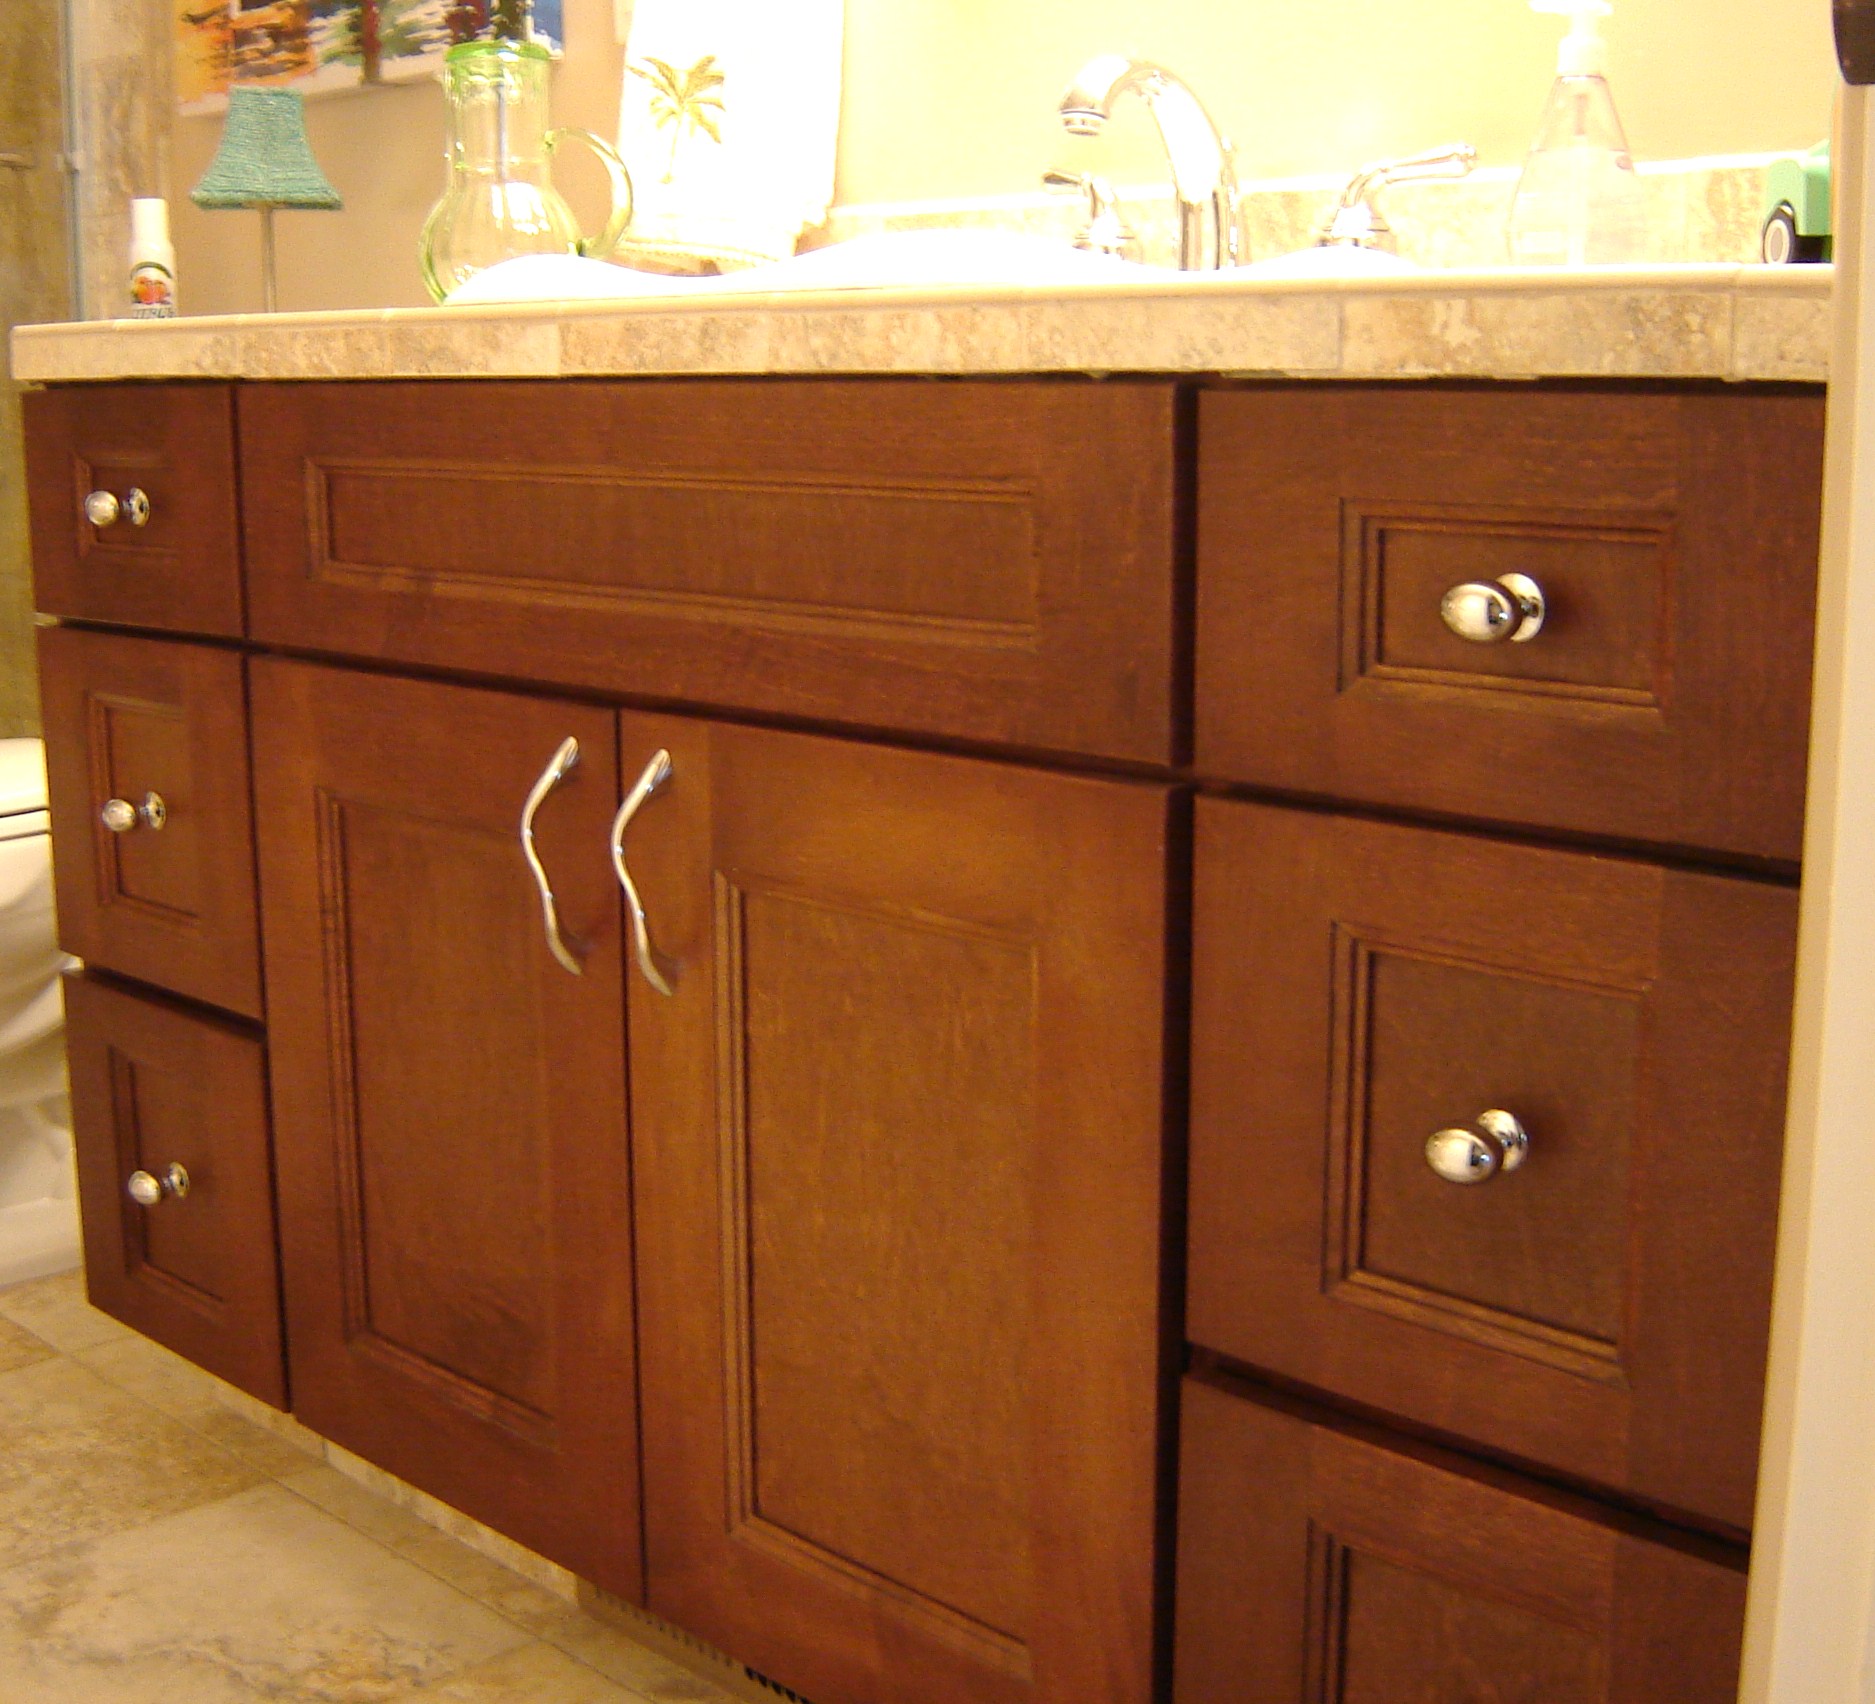 Modern bathroom cabinet installation by RiverBend Cabinetry with sleek designs